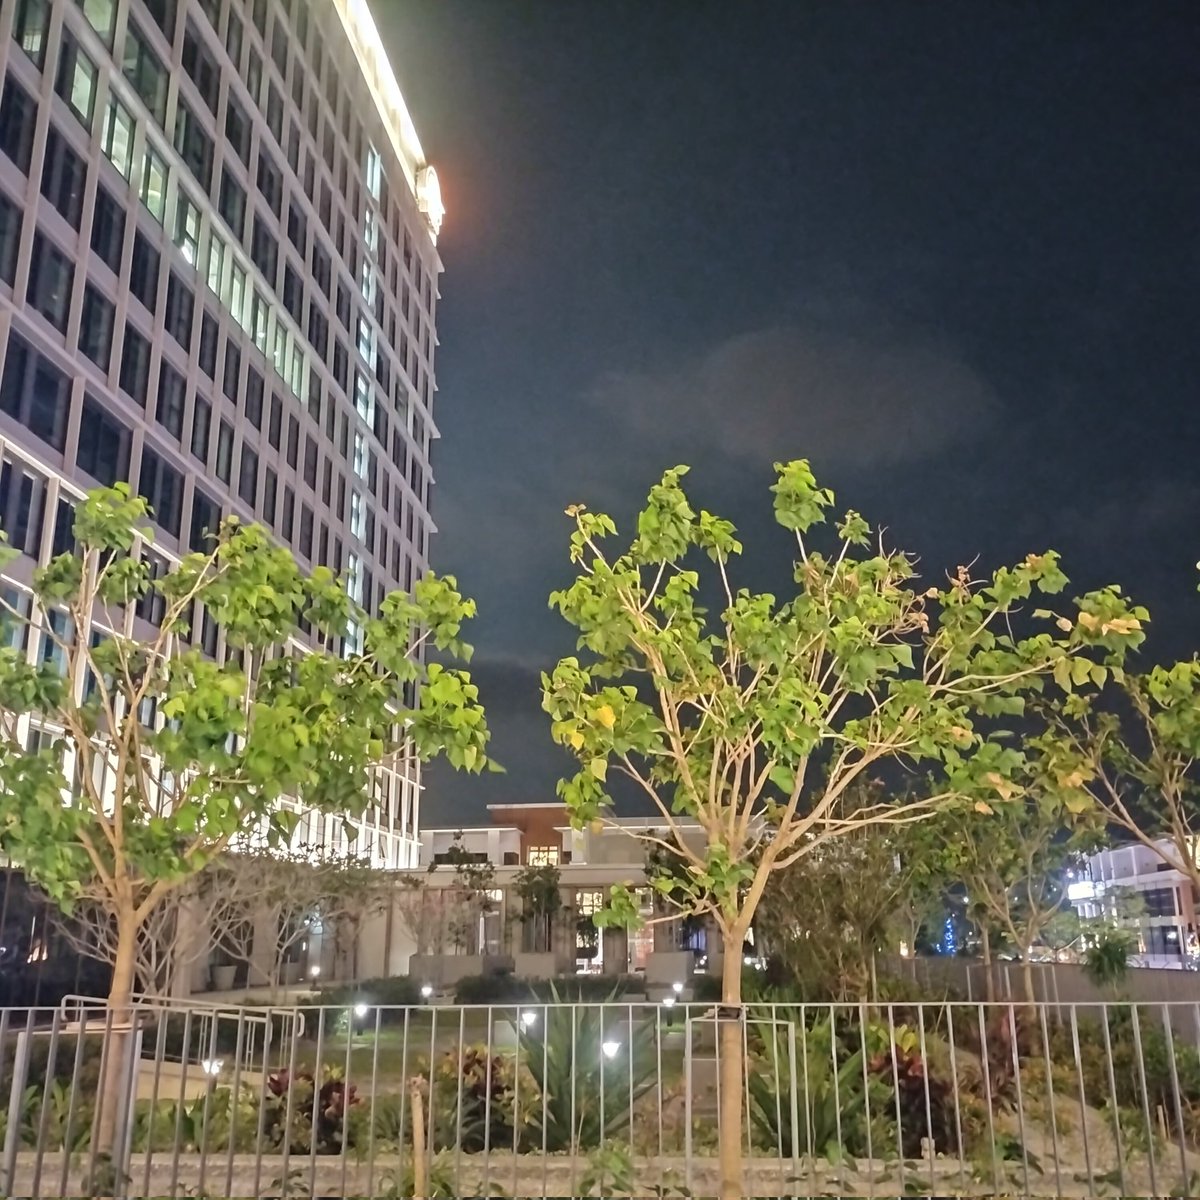 One Shell Square at Miri Times Square, Marina Parkcity.

Night time.

(Throwback pictures)